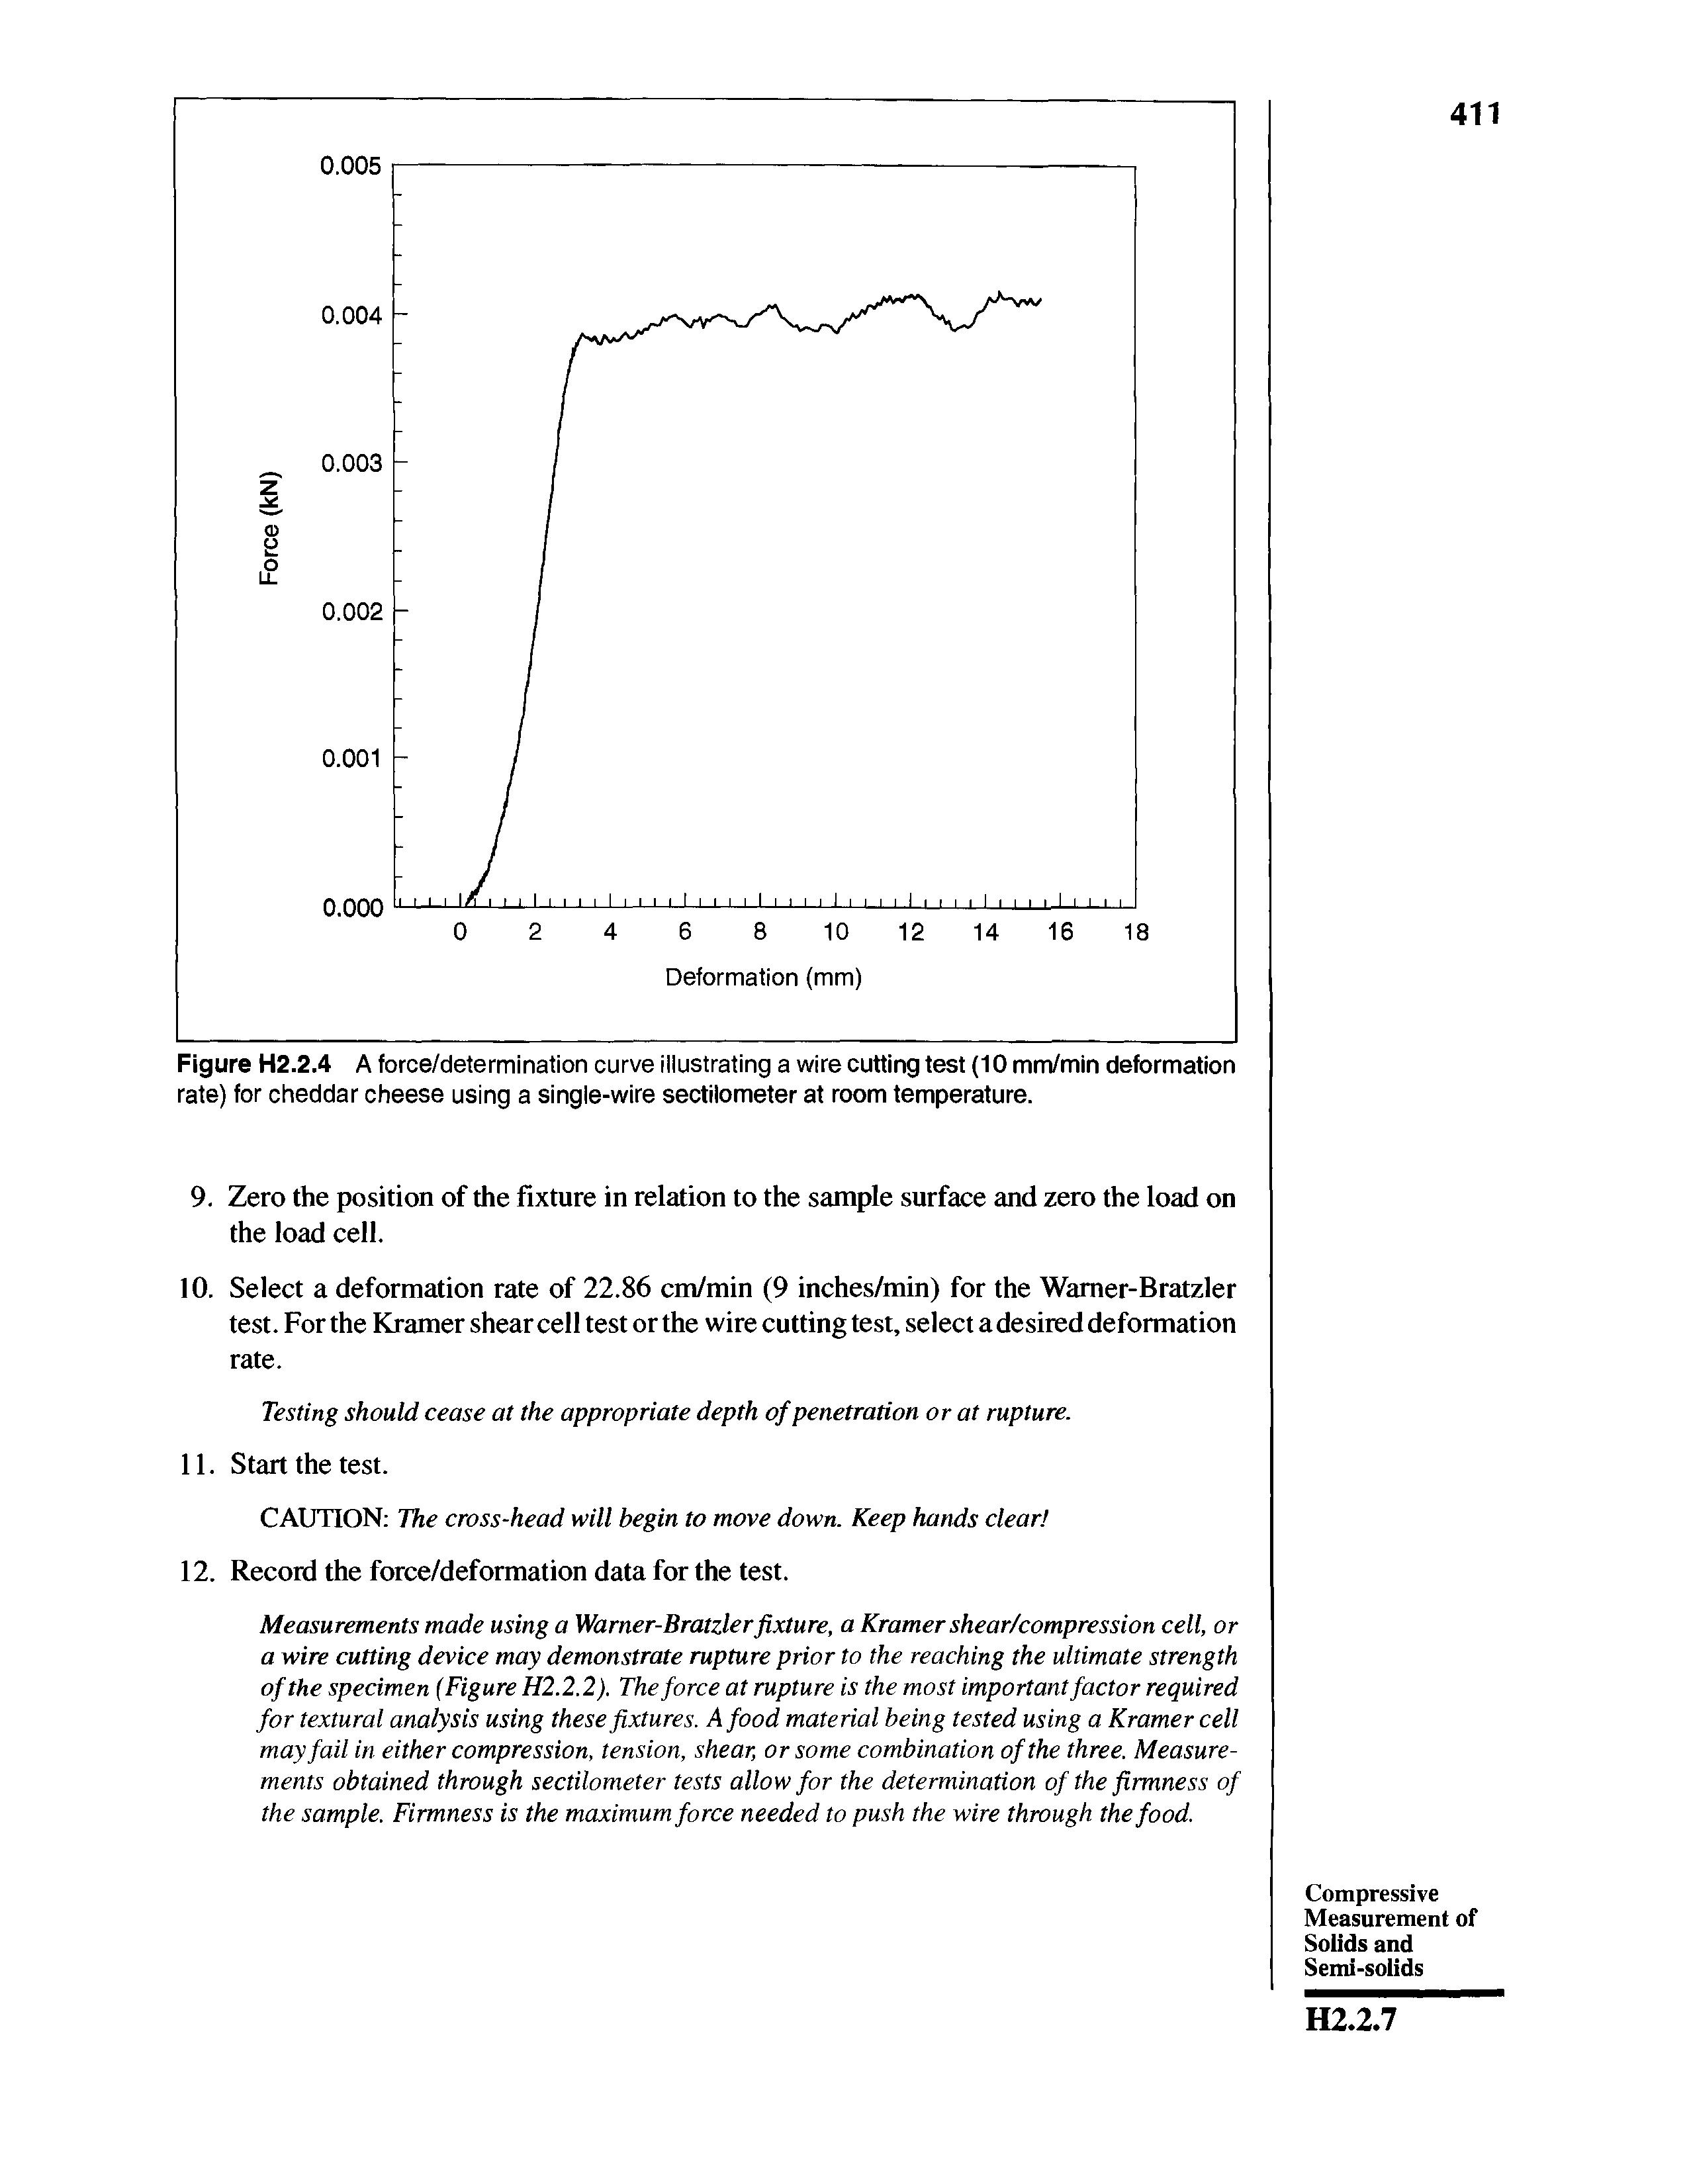 Figure H2.2.4 A force/determination curve illustrating a wire cutting test (10 mm/min deformation rate) for cheddar cheese using a single-wire sectilometer at room temperature.